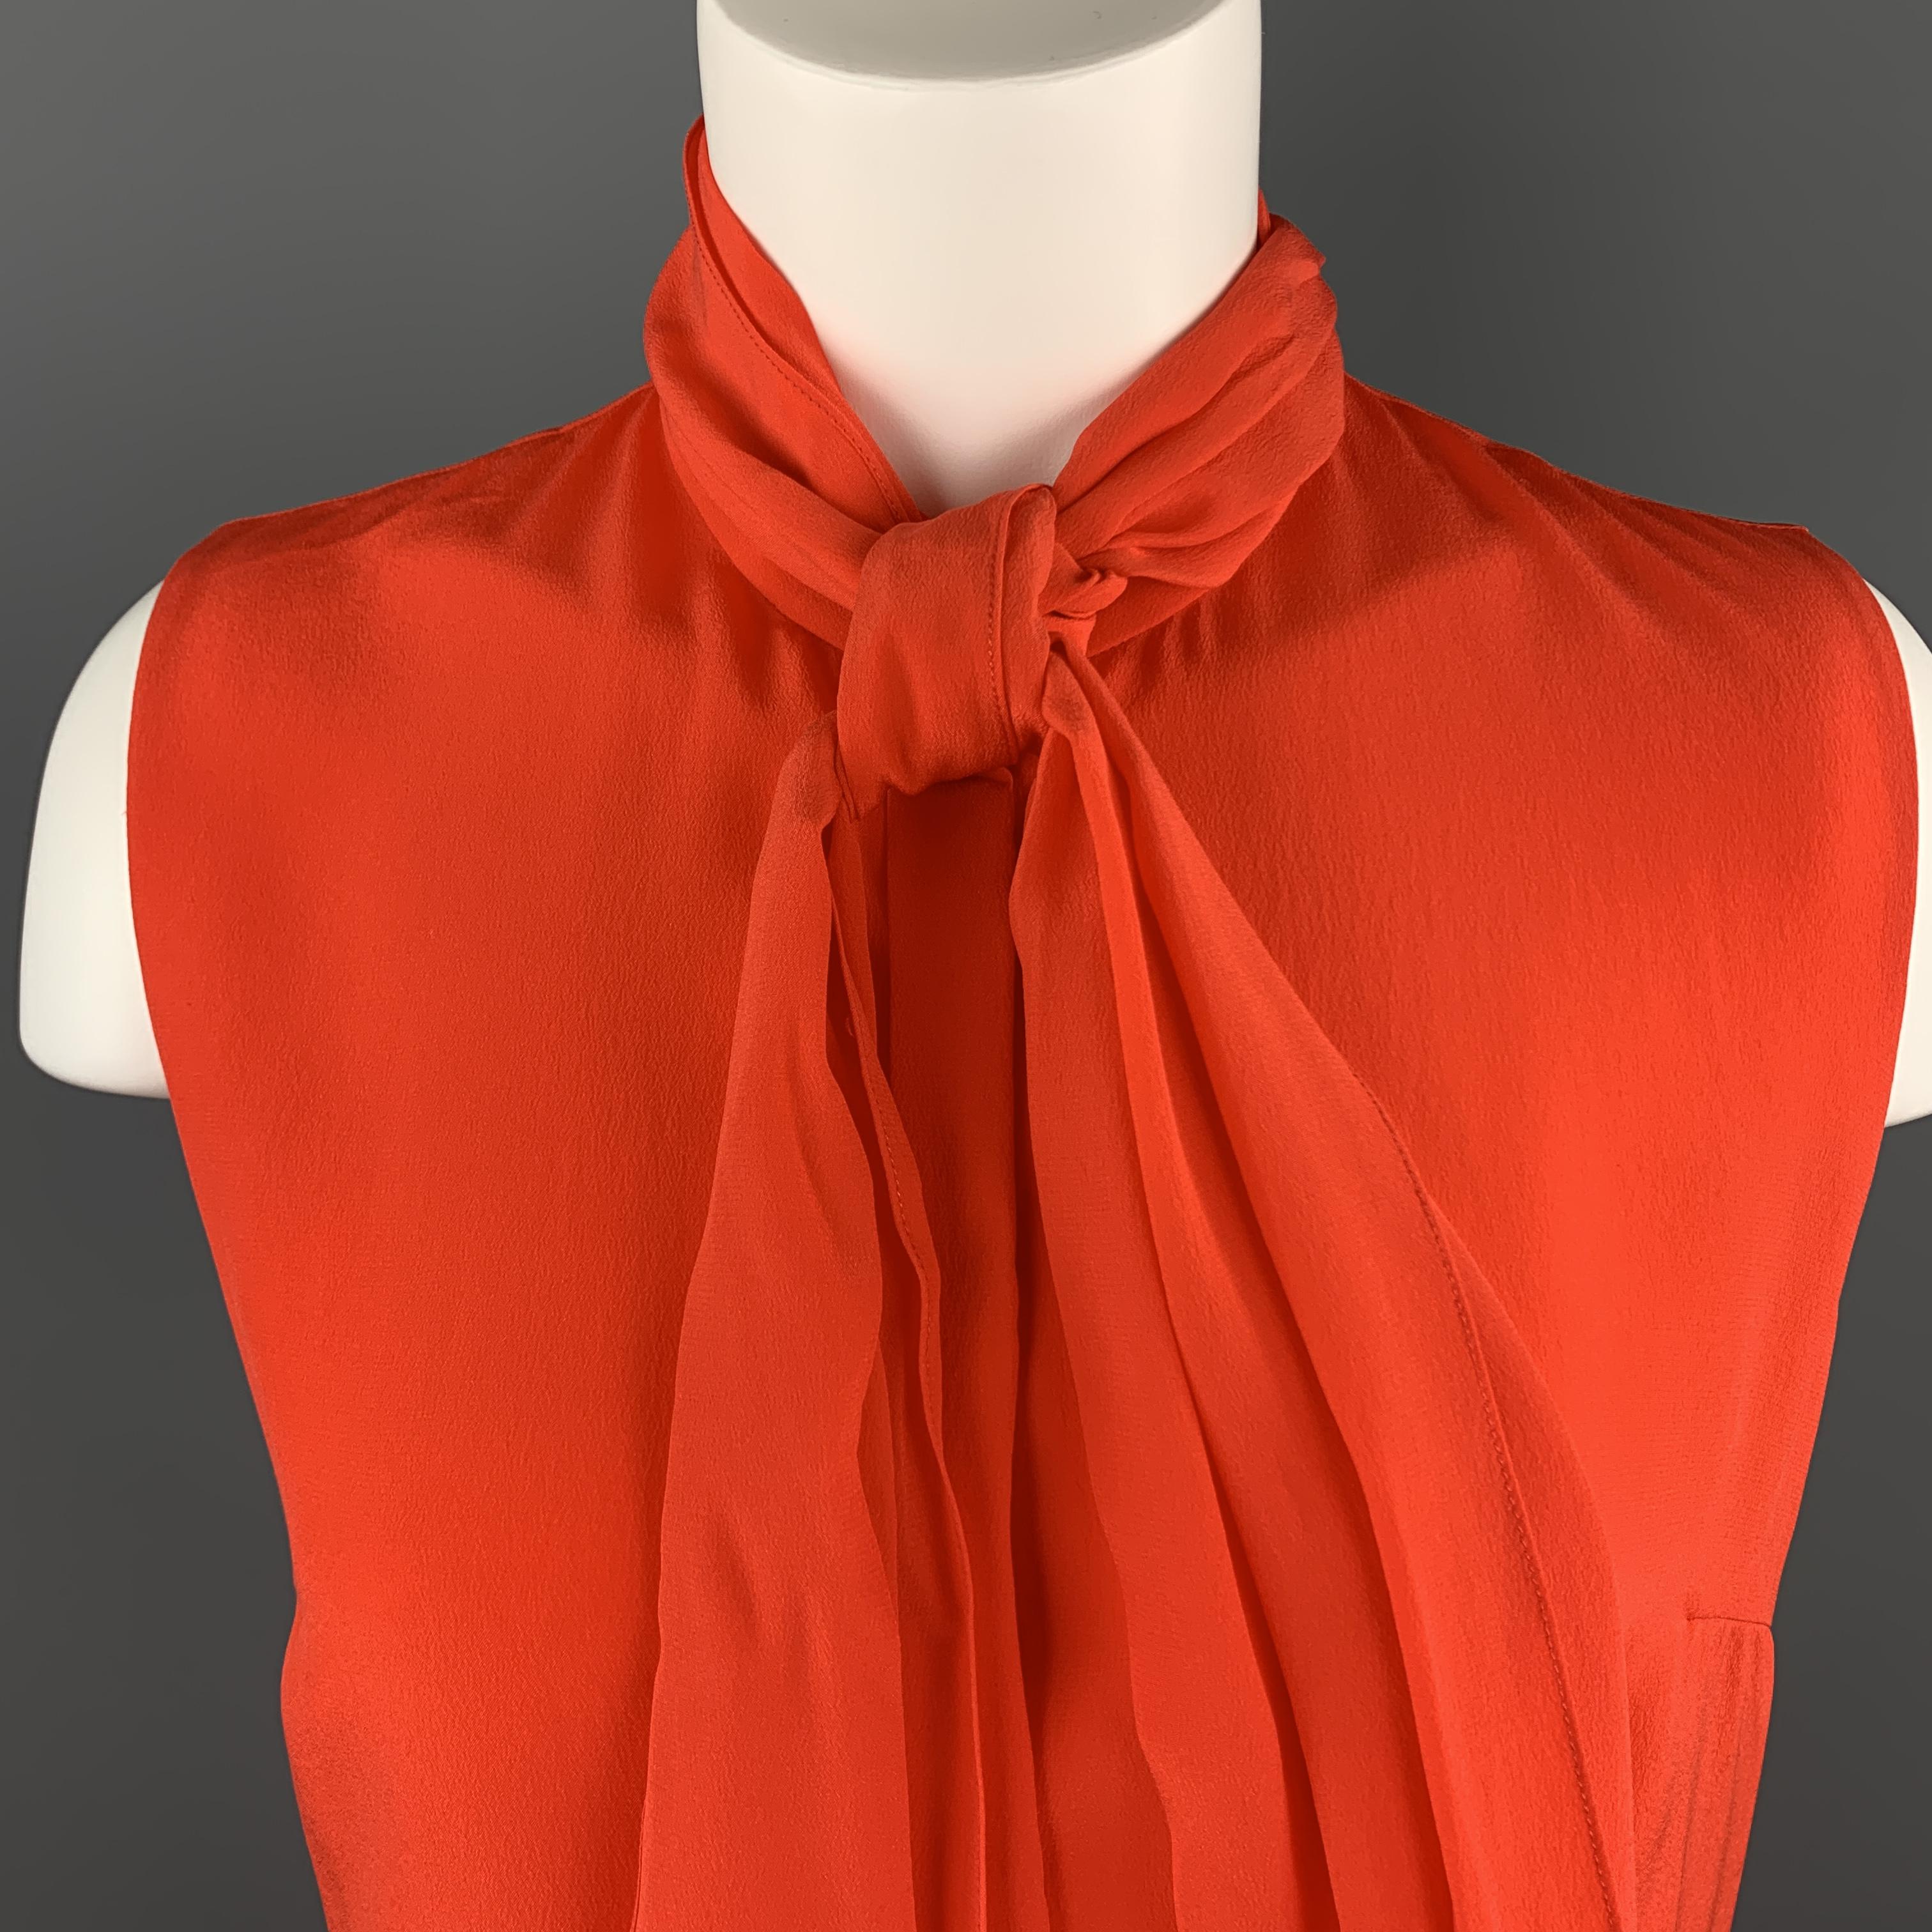 HONOR sleeveless blouse comes in a bold coral silk crepe chiffon with a band collar, hidden placket button front, and detachable bow tie collar. Made in USA.

New with Tags.
Marked: IT 40

Measurements:

Shoulder: 13.5 in.
Bust: 38 in.
Length: 26 in.